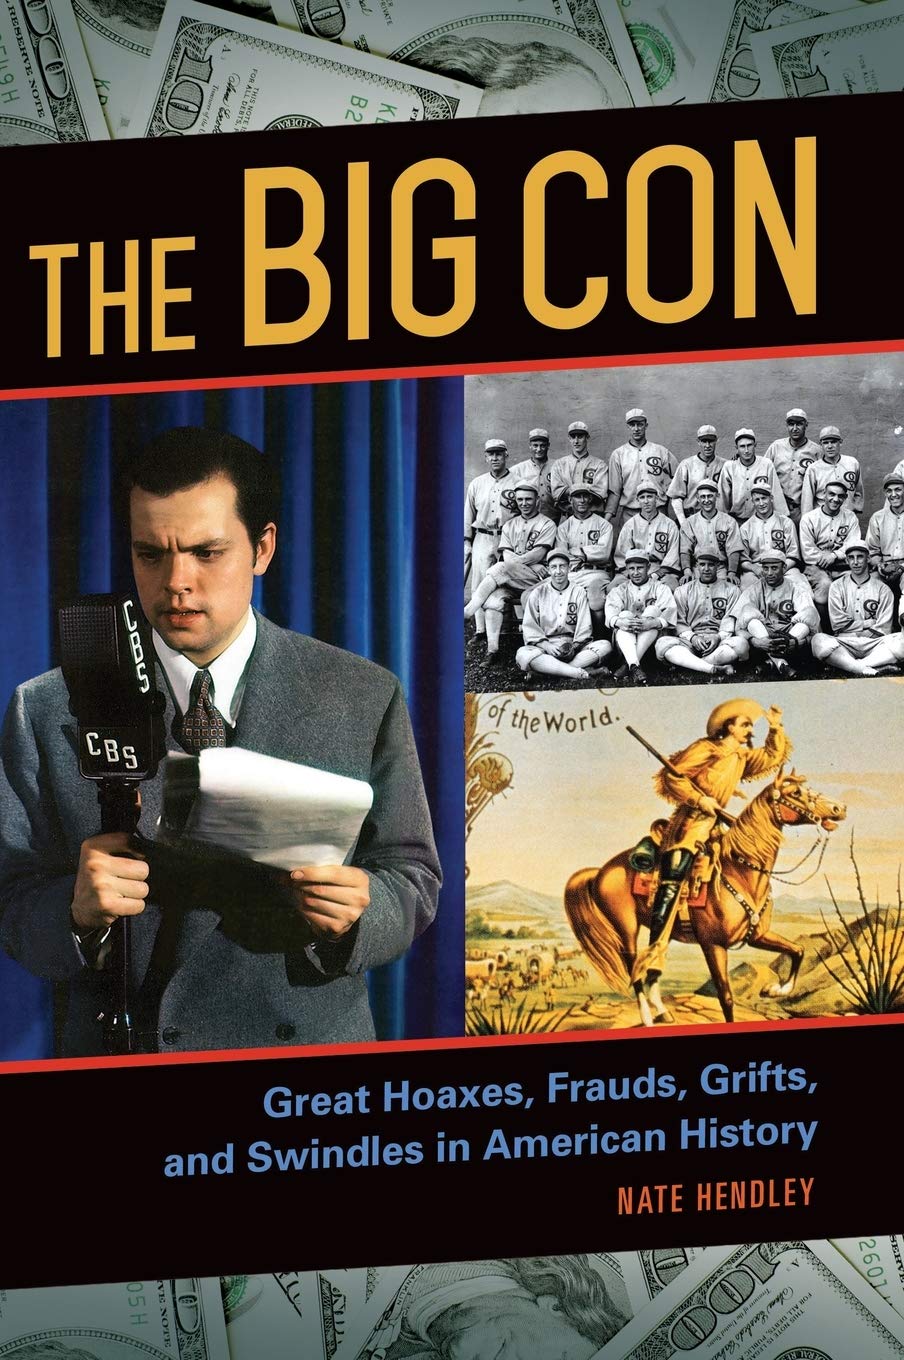 The Big Con: Great Hoaxes, Frauds, Grifts, and Swindles in American History